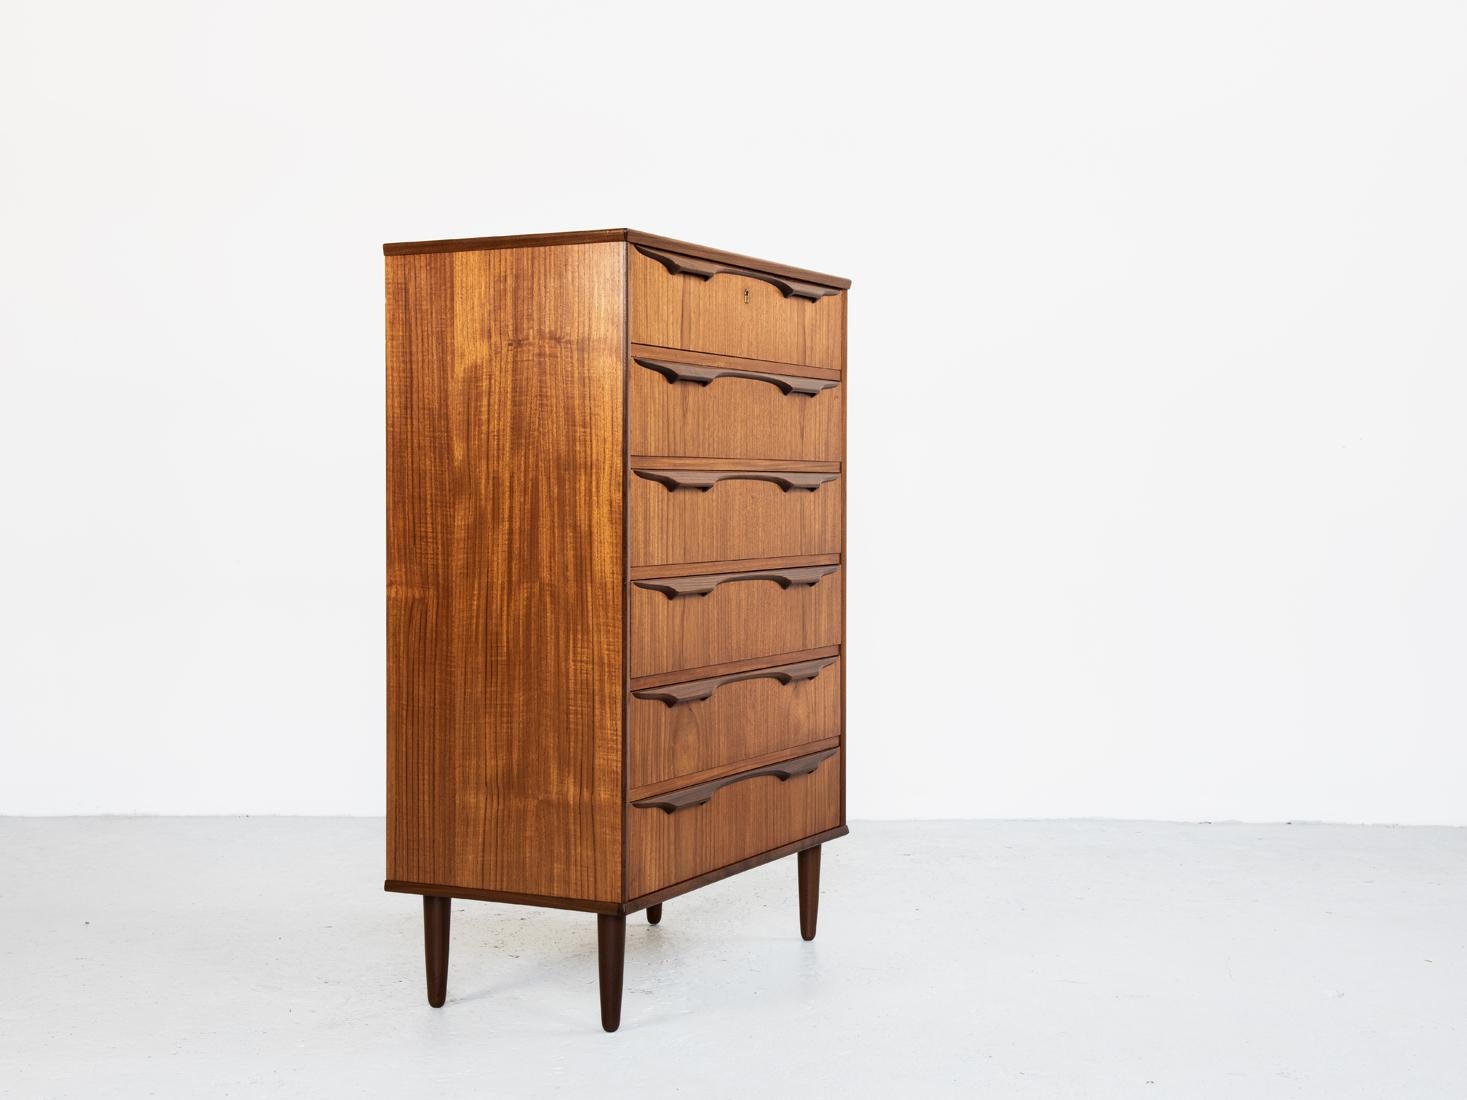 This midcentury Danish chest of 6 drawers in teak was designed by Klaus Okholm and made in Denmark in the 1960s. This chest shows high quality manufacturing with the best materials and real craftsmanship. It has beautiful drawer handles. This chest